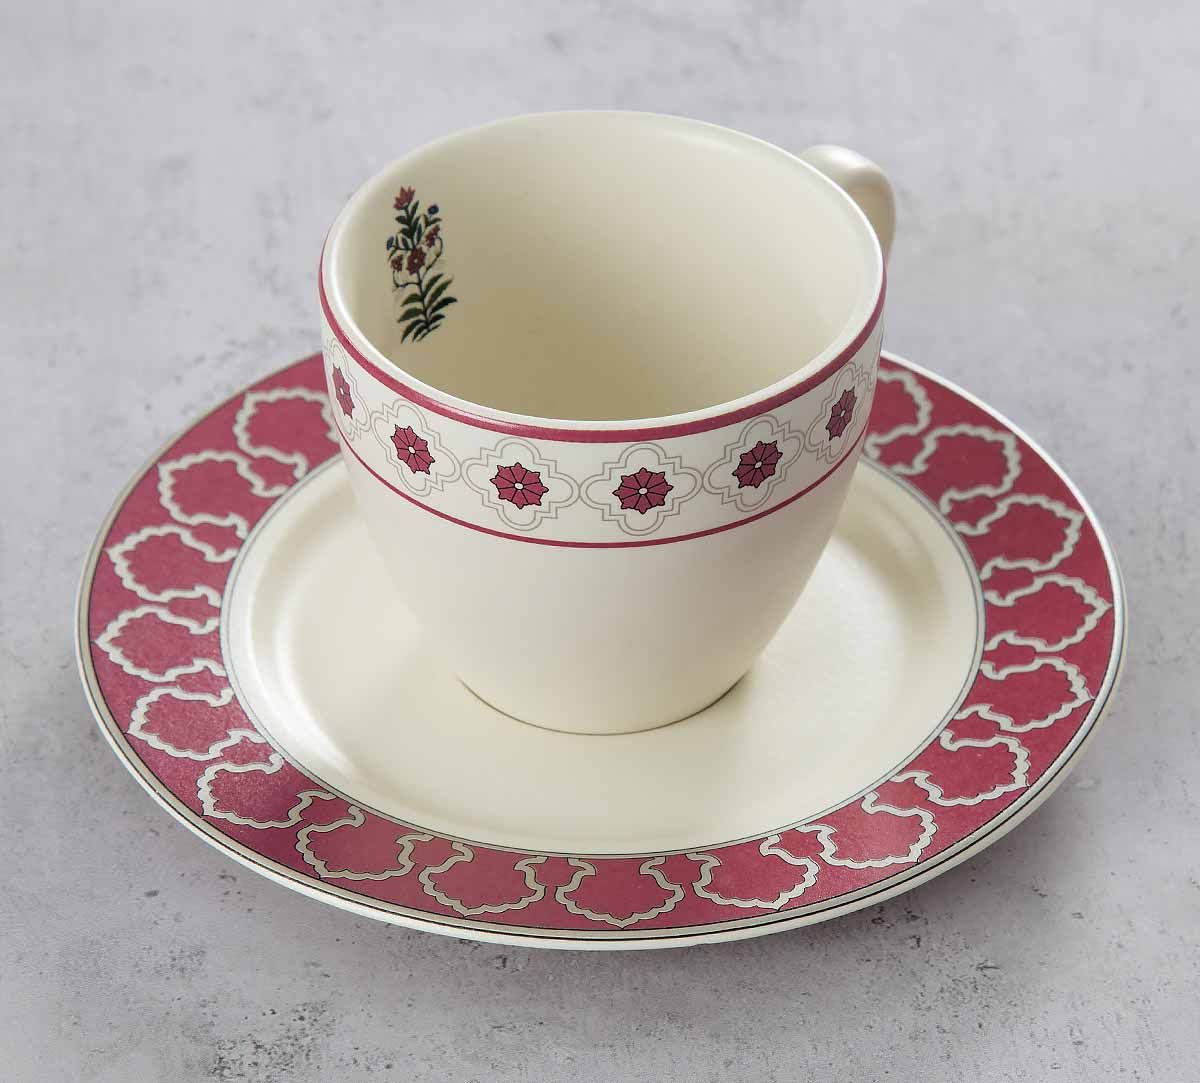 India Circus Floral Lattice Cup and Saucer